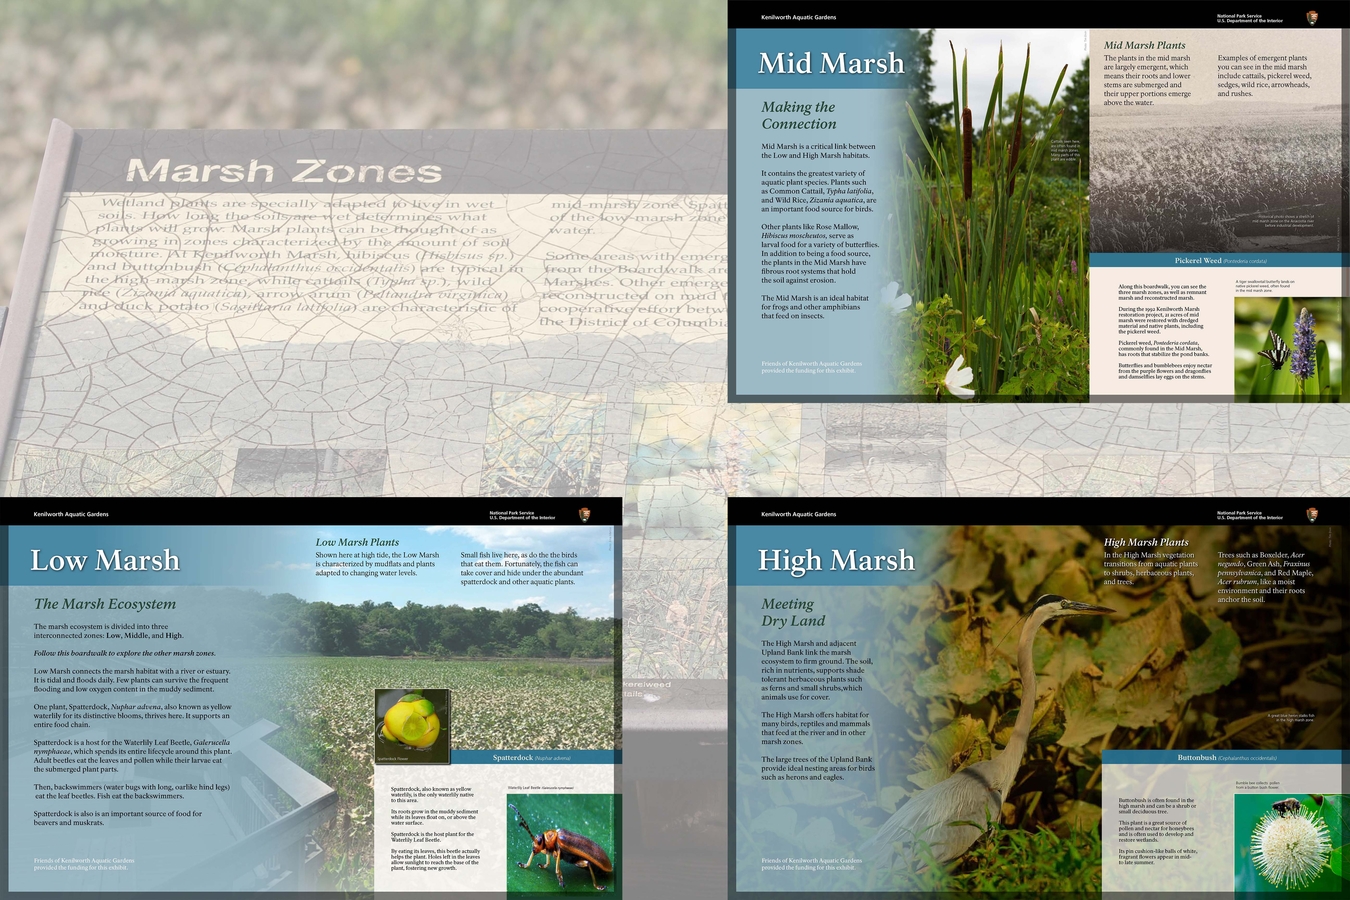 4 Marsh Zones : Wayside displays along the boardwalk replaced old weathered signs for the three distinct marsh zones.